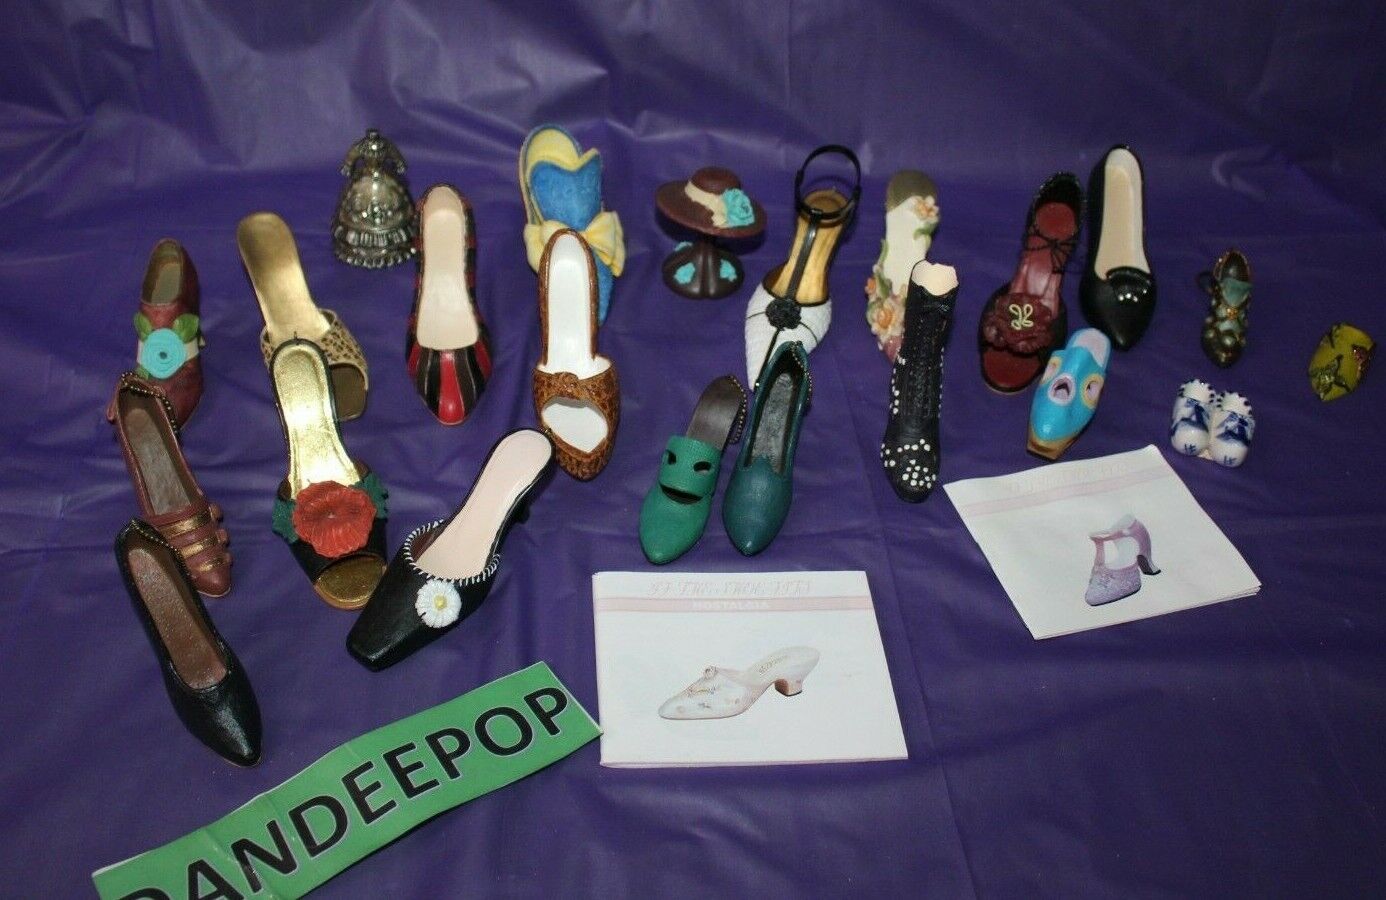 22 Piece Nostalgia And Other Miniature Shoe Figurines Dress Form And Hat 